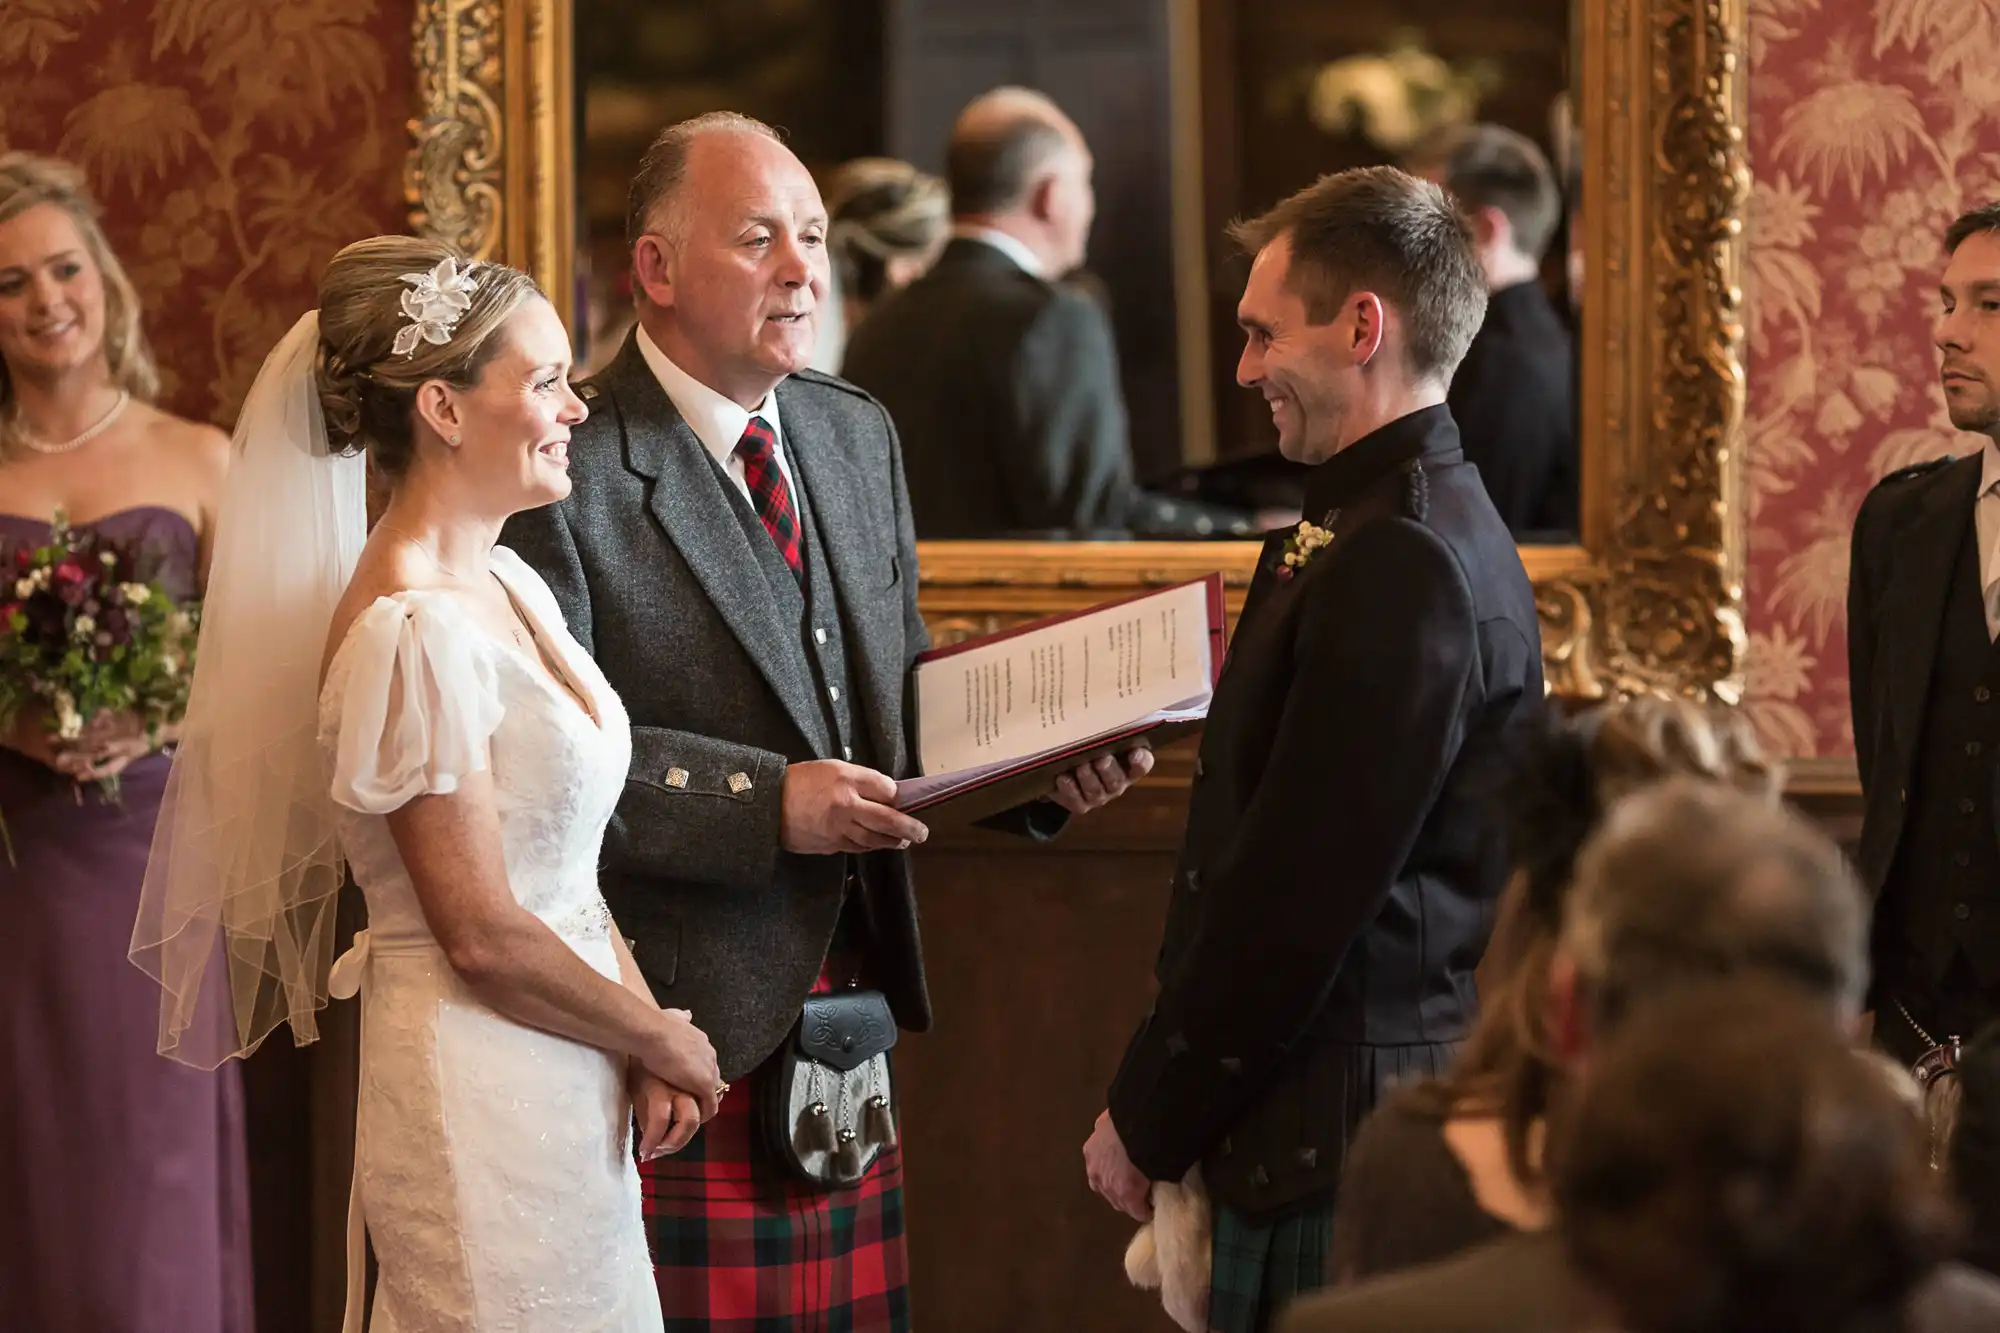 A bride and groom smiling at each other during a wedding ceremony, with an officiant in traditional scottish attire holding a booklet.